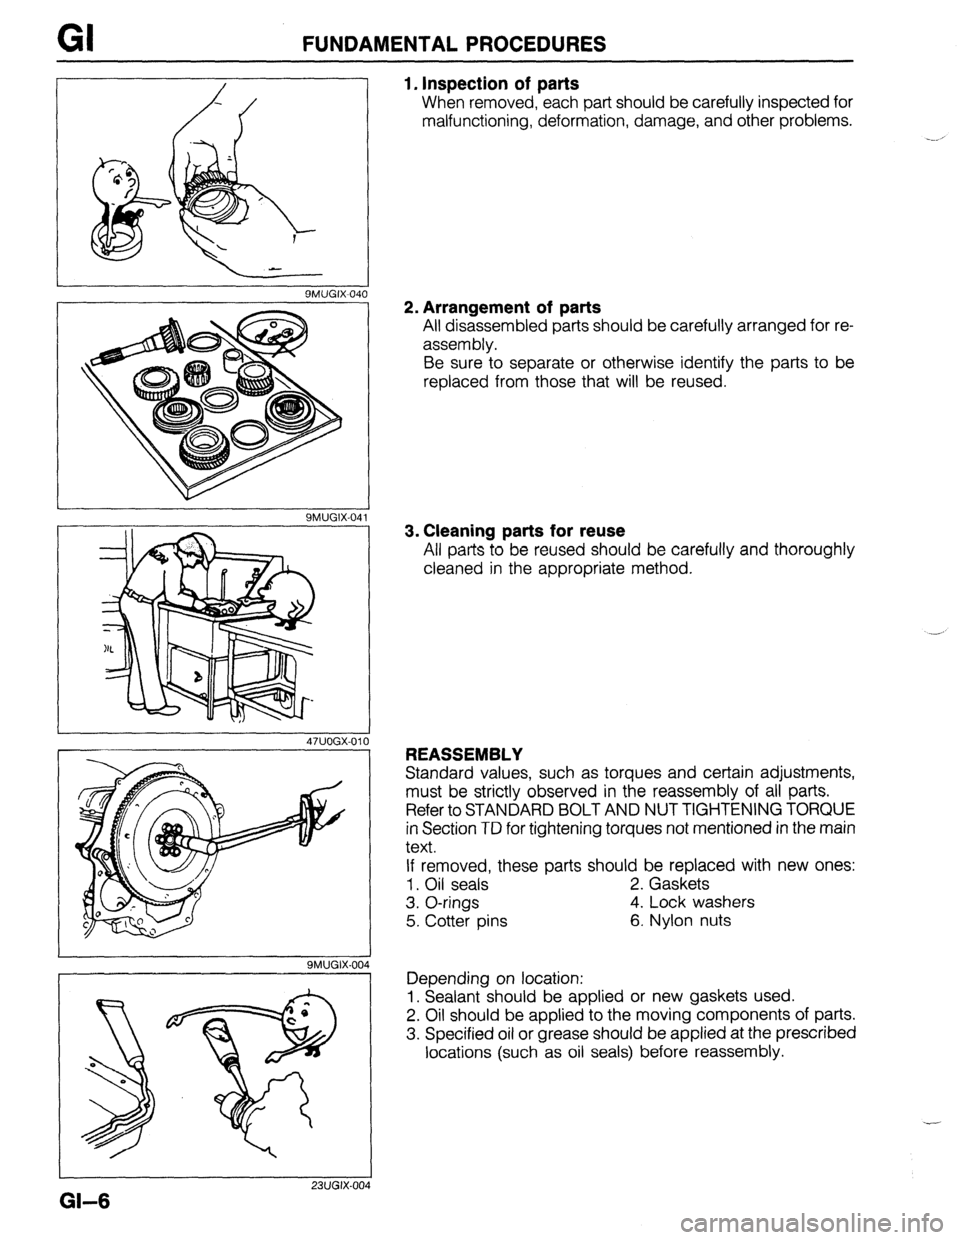 MAZDA 323 1989  Factory Repair Manual GI FUNDAMENTAL PROCEDURES 
9MUGIX-04t 3 
9MUGIX-041 
9MUGIX.004 
I 
Depending on location: 
1. Inspection of parts 
When removed, each part should be carefully inspected for 
malfunctioning, deformati